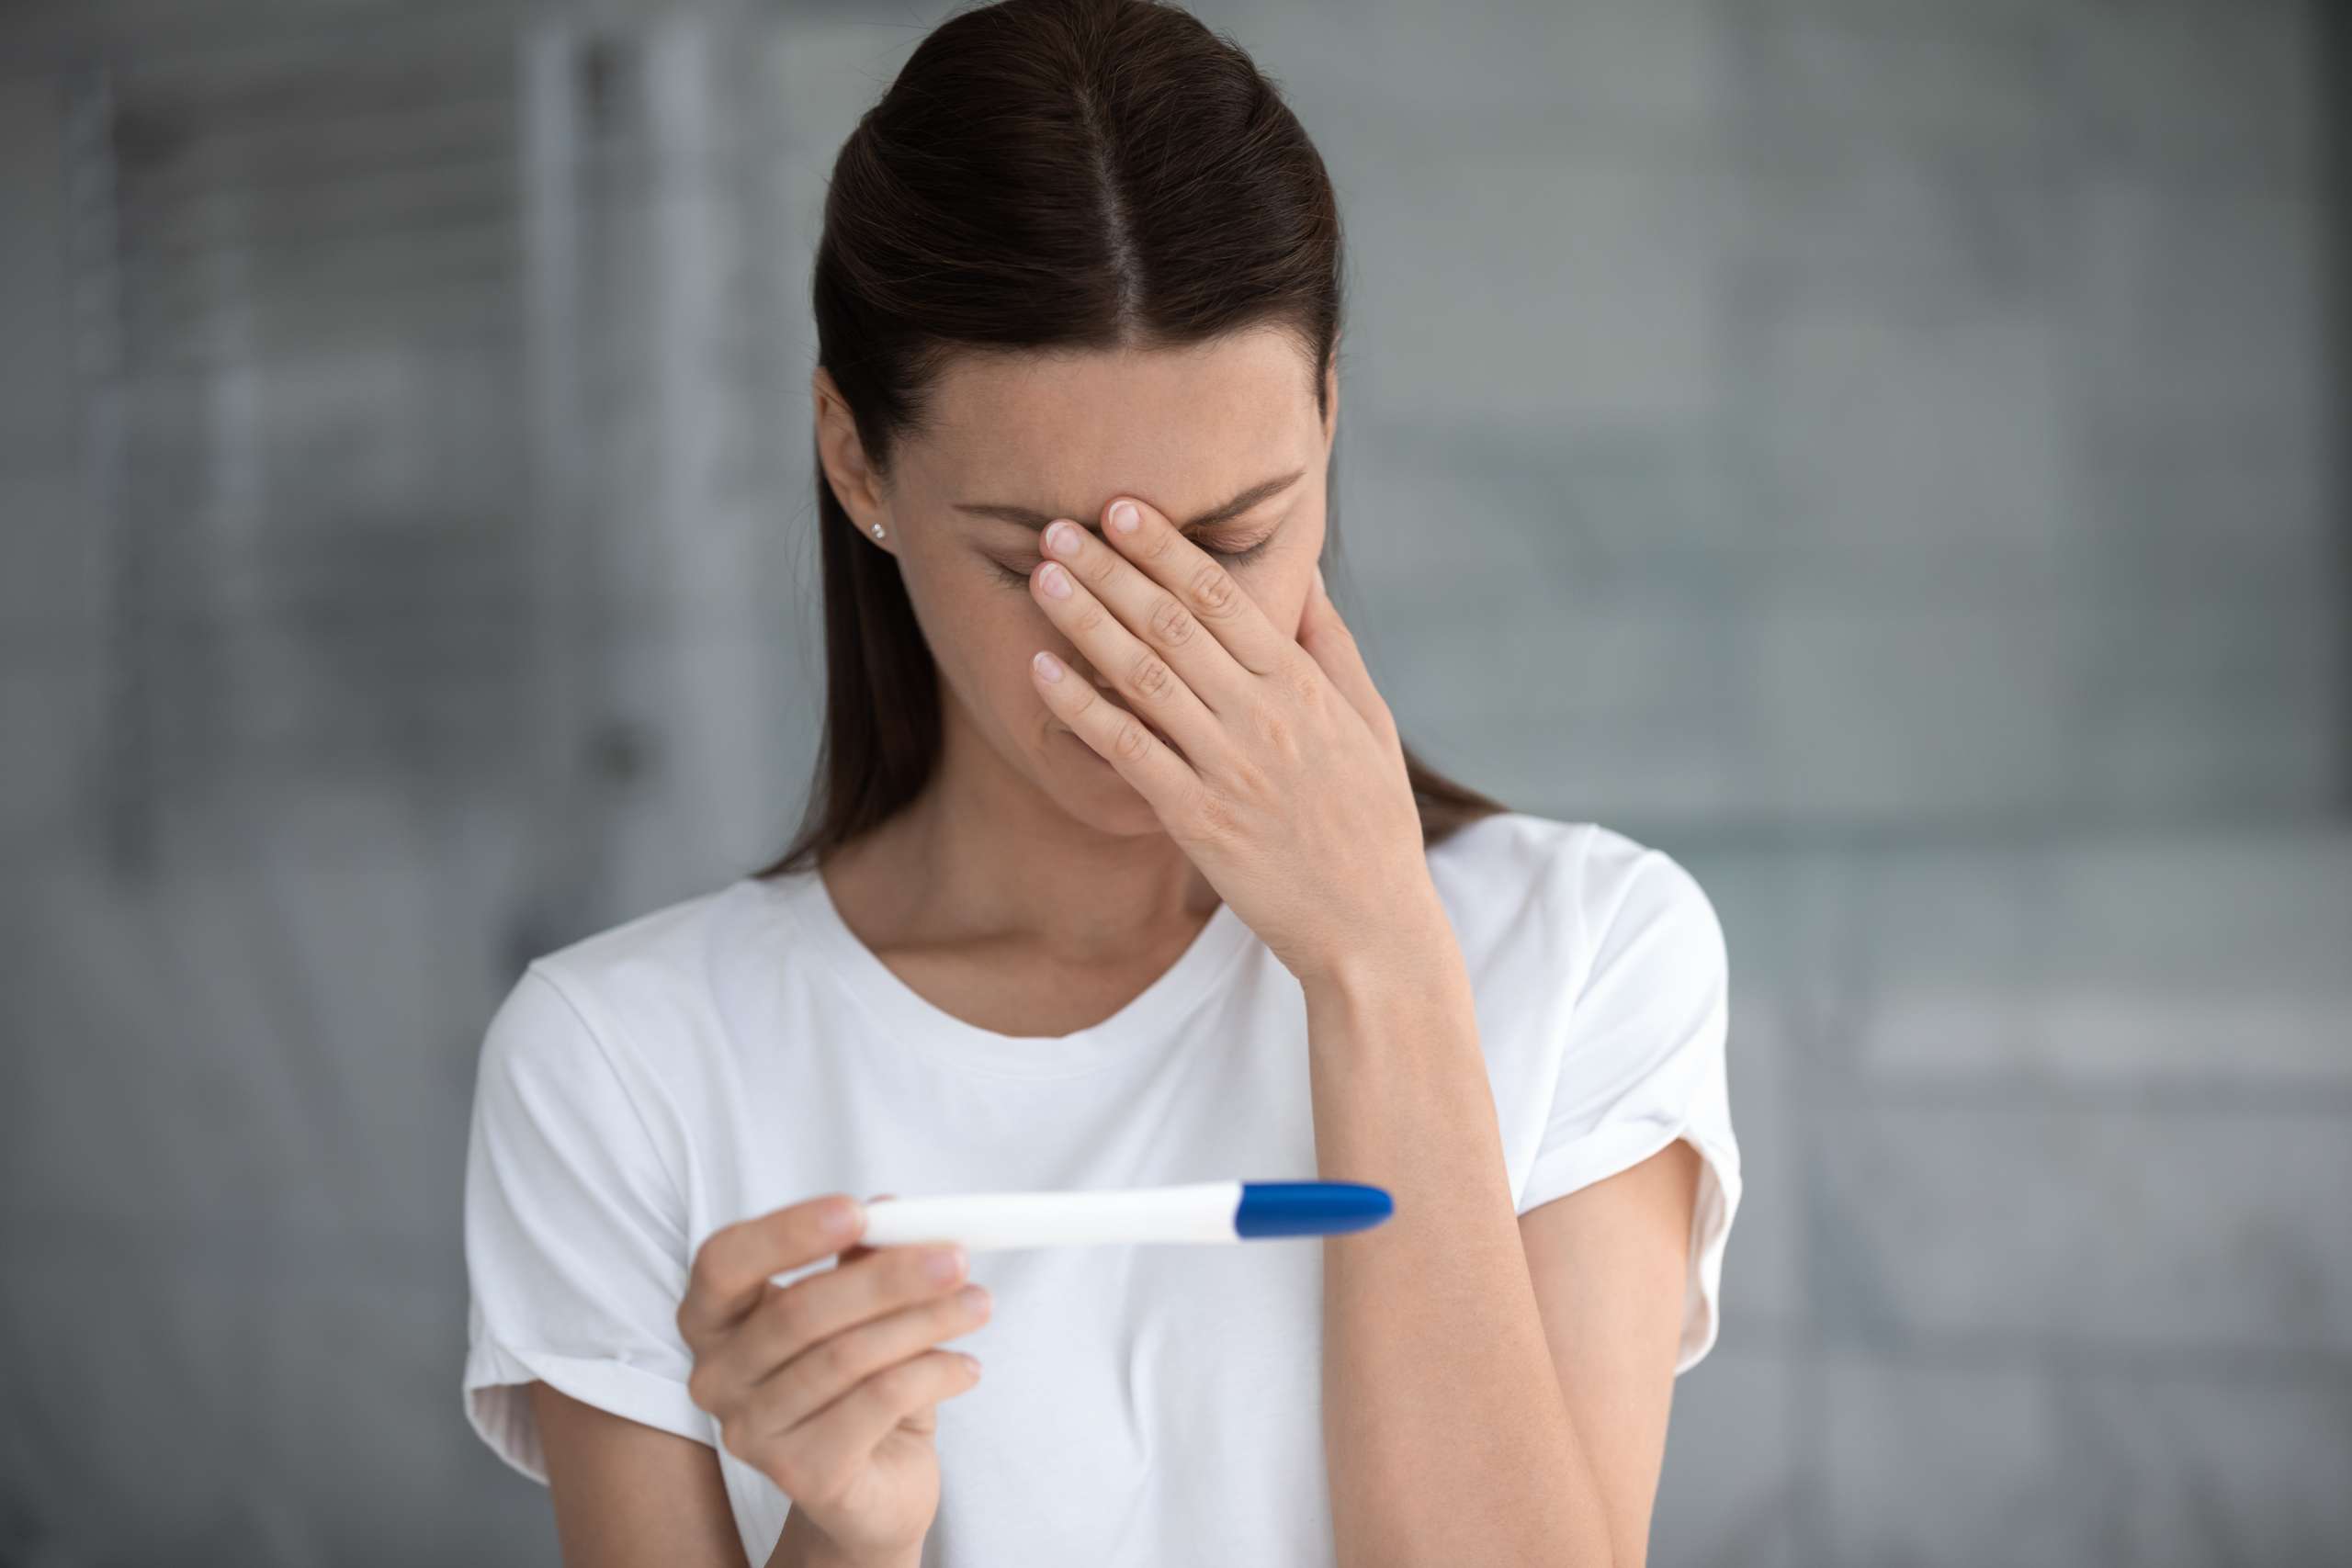 Upset woman looking at pregnancy test bad result feels disappointed